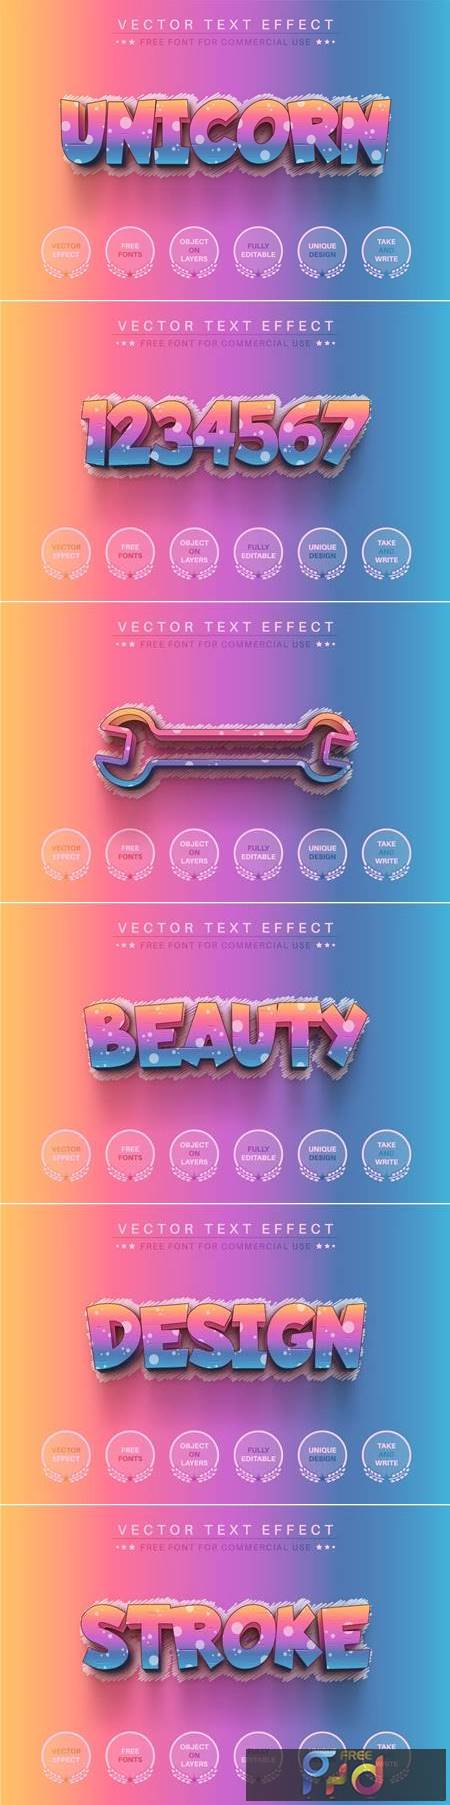 Rainbow Shading - Editable Text Effect, Font Style NGD7L47 1